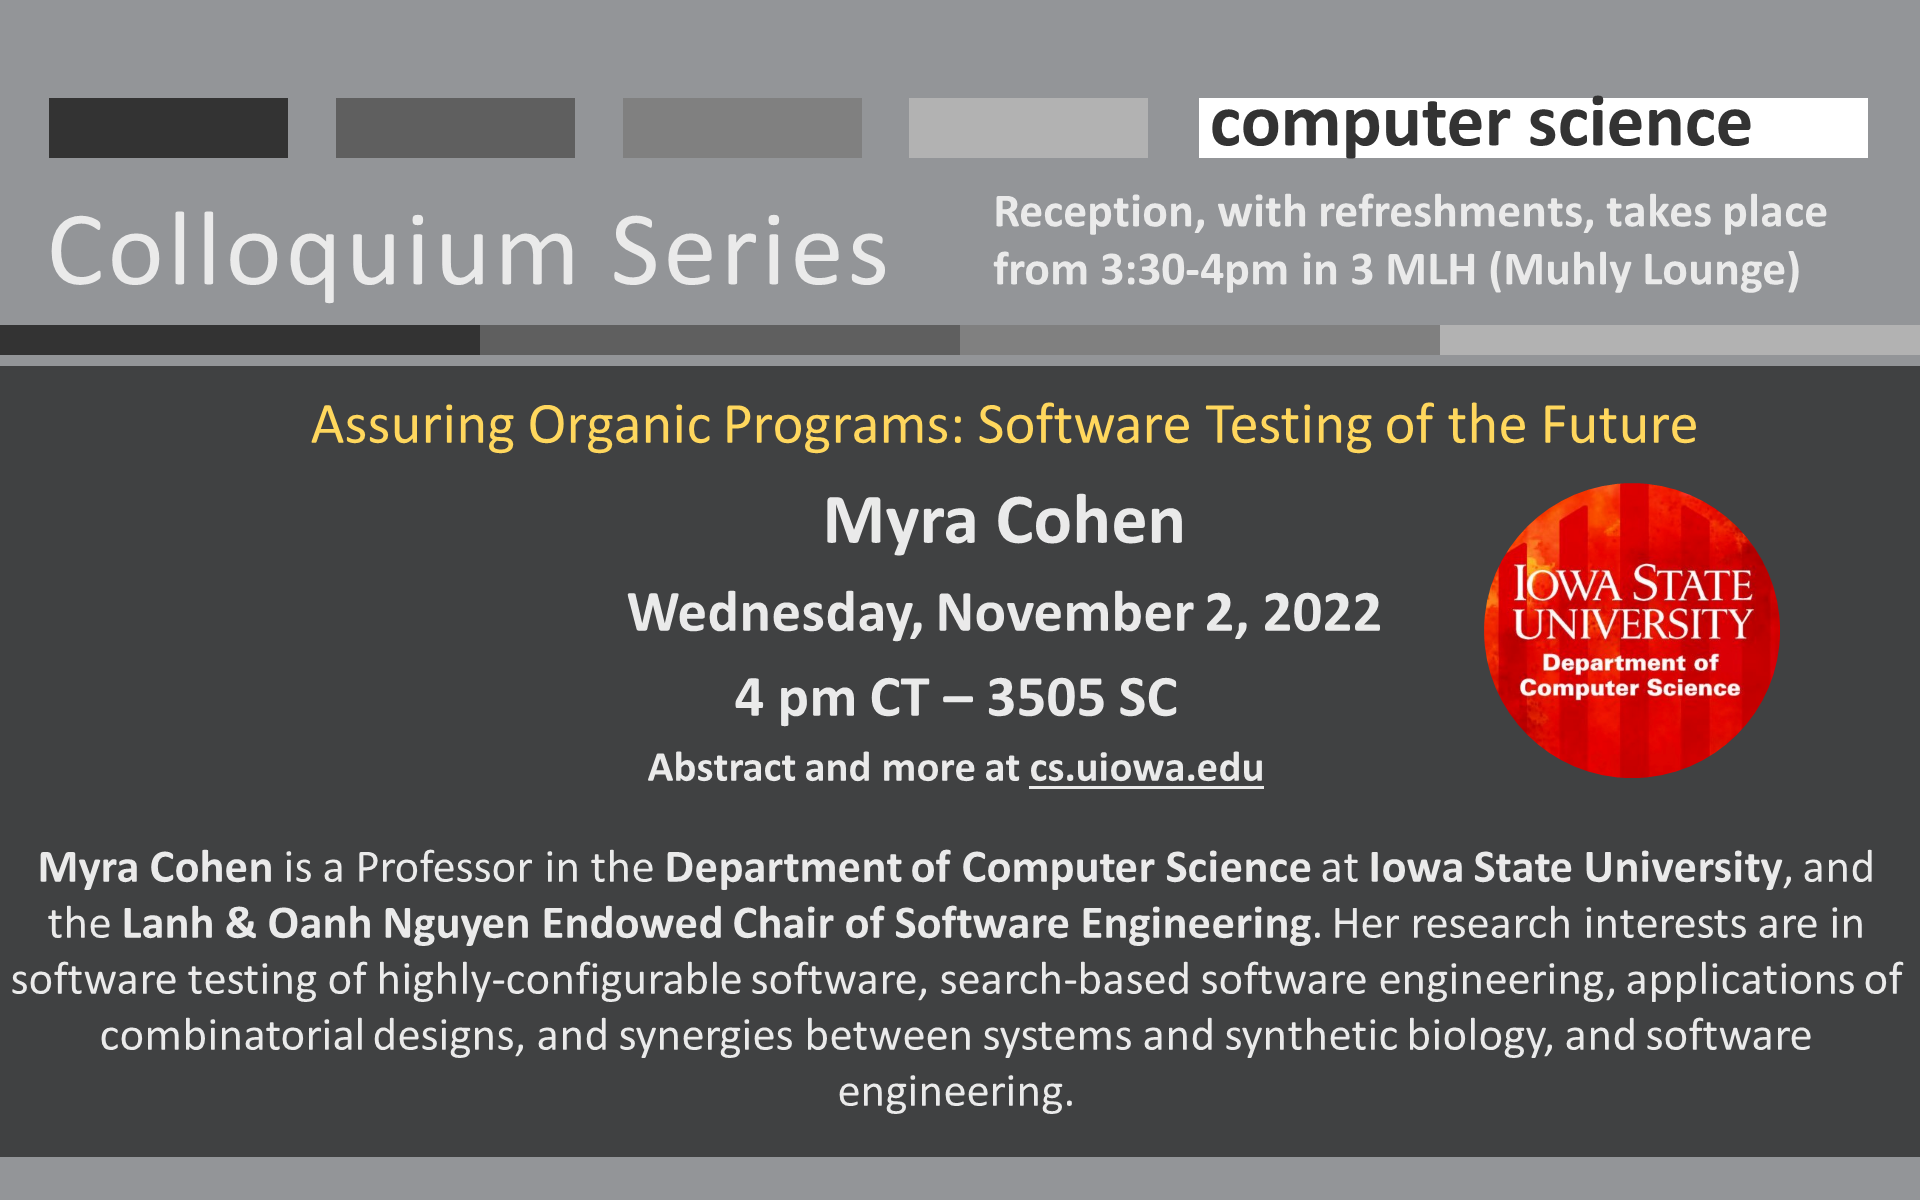 University of Iowa Computer Science Colloquium Series - Assuring Organic Programs: Software Testing of the Future Myra Cohen Wednesday, November 2, 2022 4 pm CT – 3505 SC Abstract and more at cs.uiowa.edu  Myra Cohen is a Professor in the Department of Computer Science at Iowa State University, and the Lanh & Oanh Nguyen Endowed Chair of Software Engineering. Her research interests are in software testing of highly-configurable software, search-based software engineering, applications of combinatorial designs, and synergies between systems and synthetic biology, and software engineering.  Reception, with refreshments, takes place from 3:30-4pm in 3 MLH (Muhly Lounge)